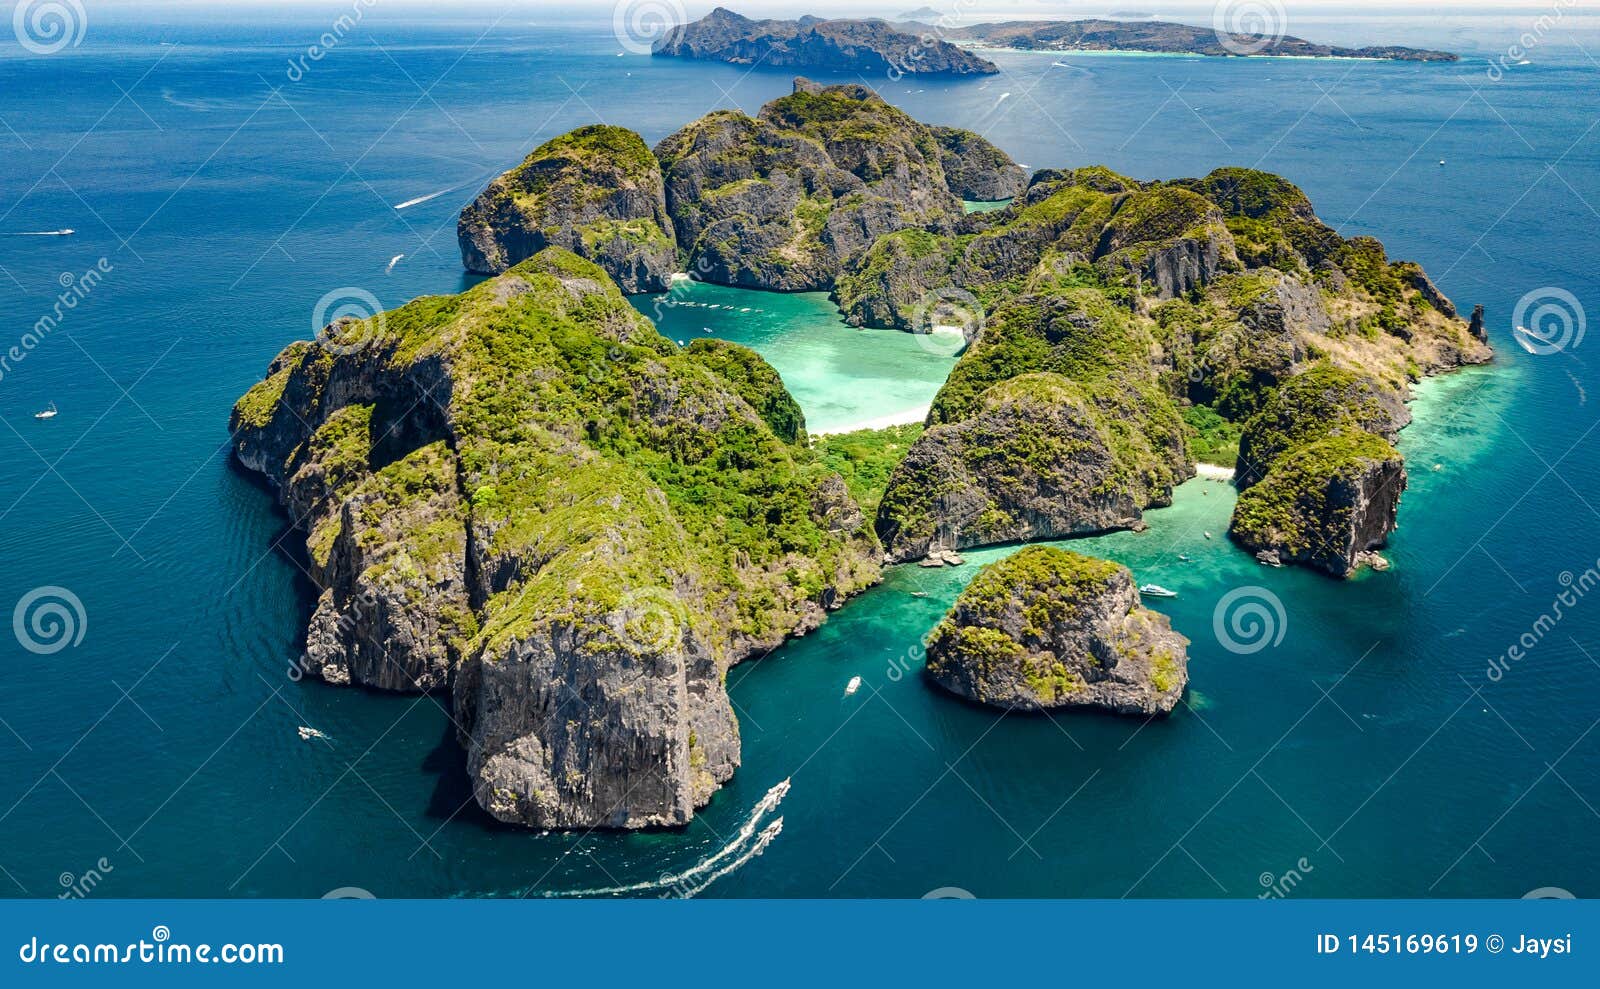 aerial drone view of tropical ko phi phi island, beaches and boats in blue clear andaman sea water from above, thailand